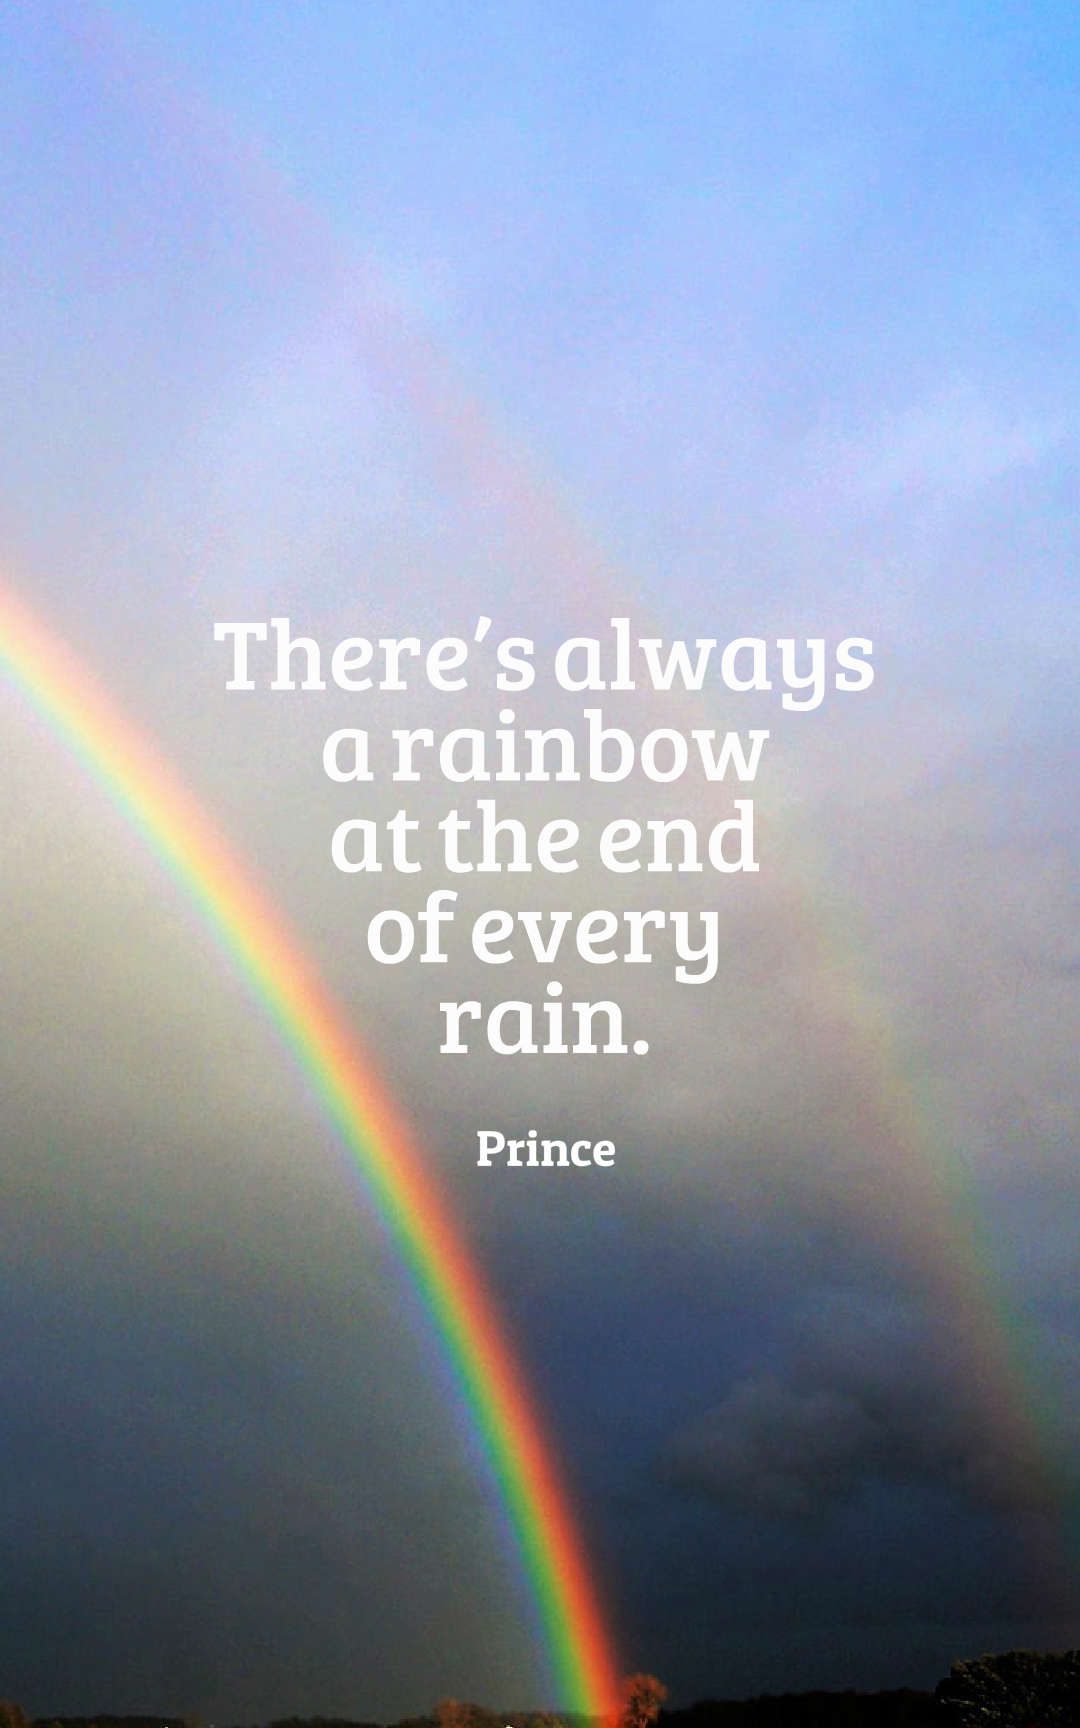 There’s always a rainbow at the end of every rain.